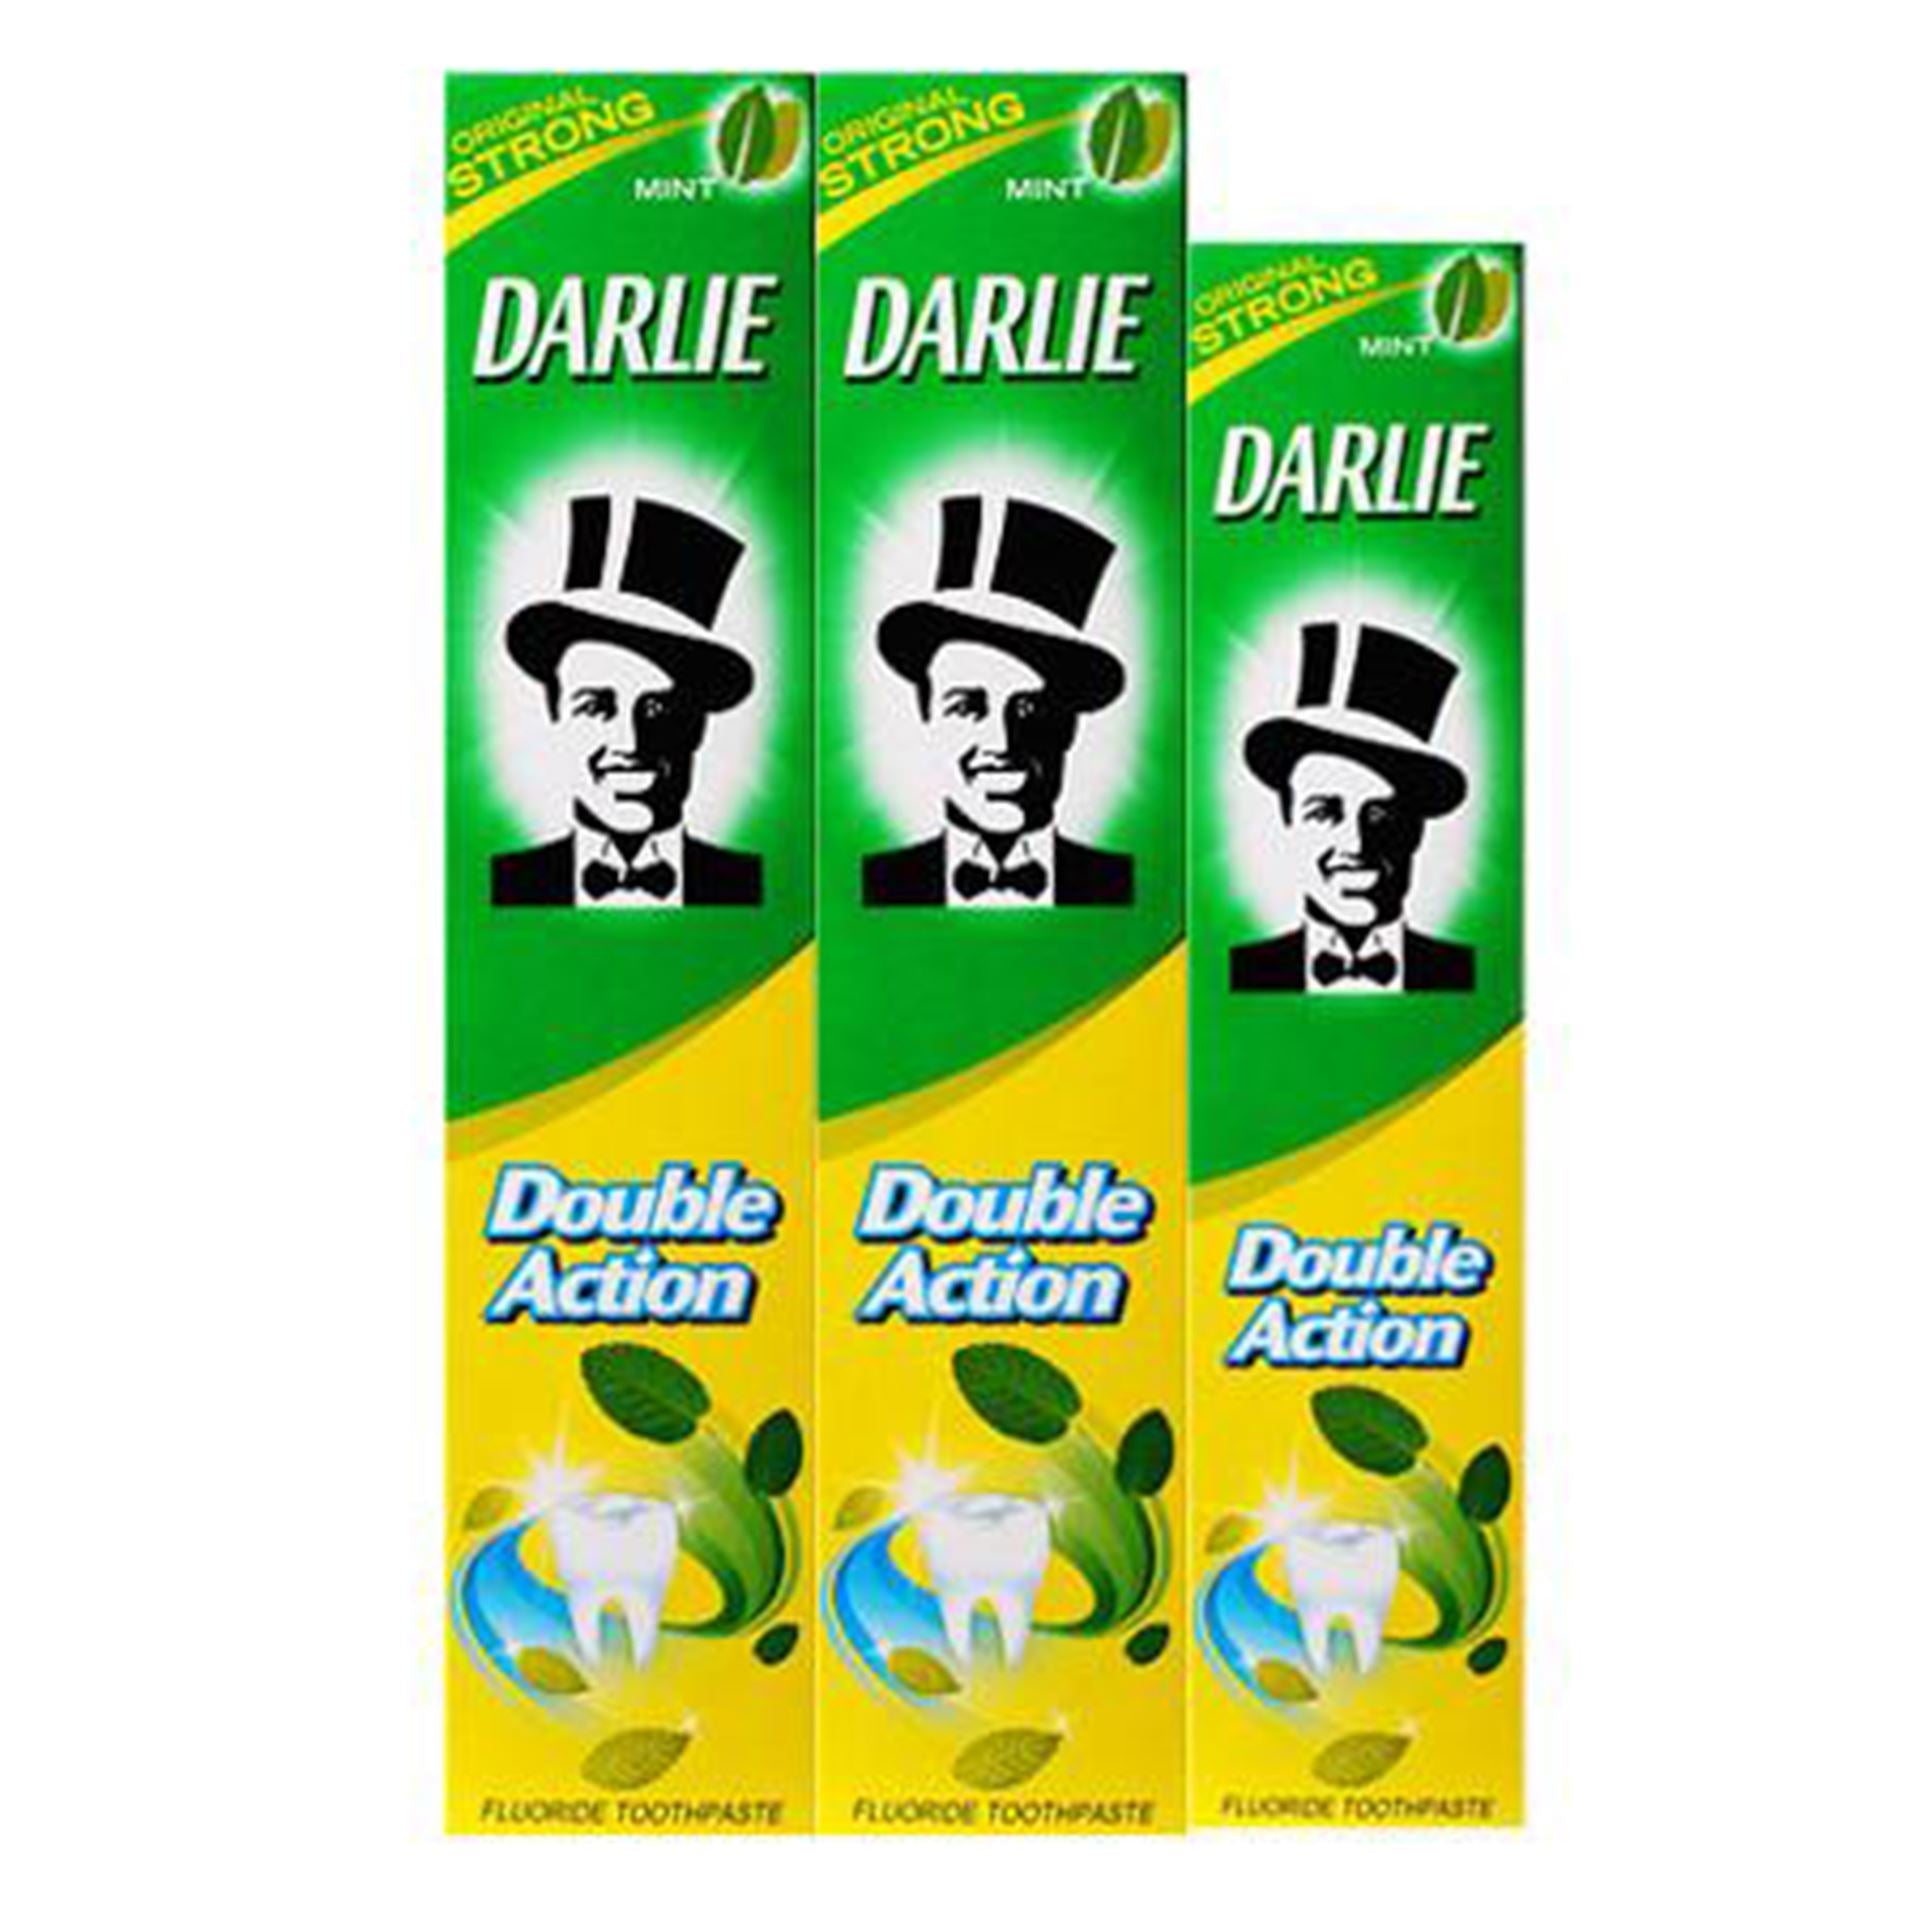 Darlie Double Action Original Strong Natural Mint Essence Toothpaste